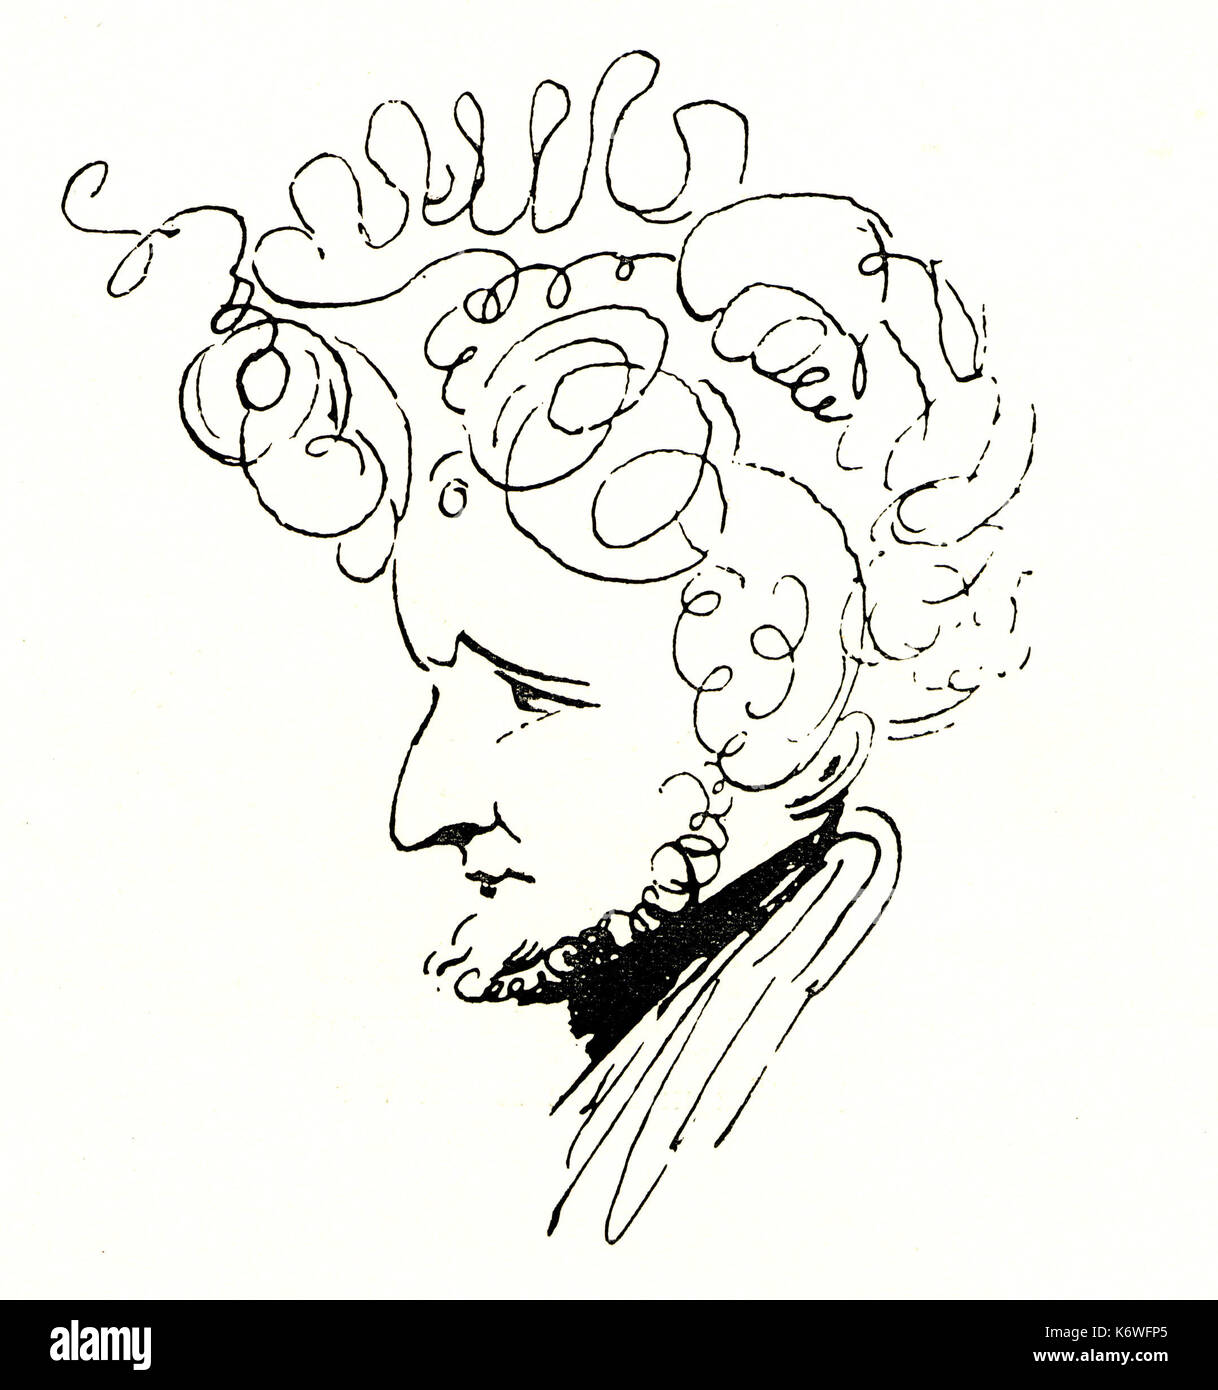 BERLIOZ - Caricature by unknown artist French composer (1803-1869) Stock Photo